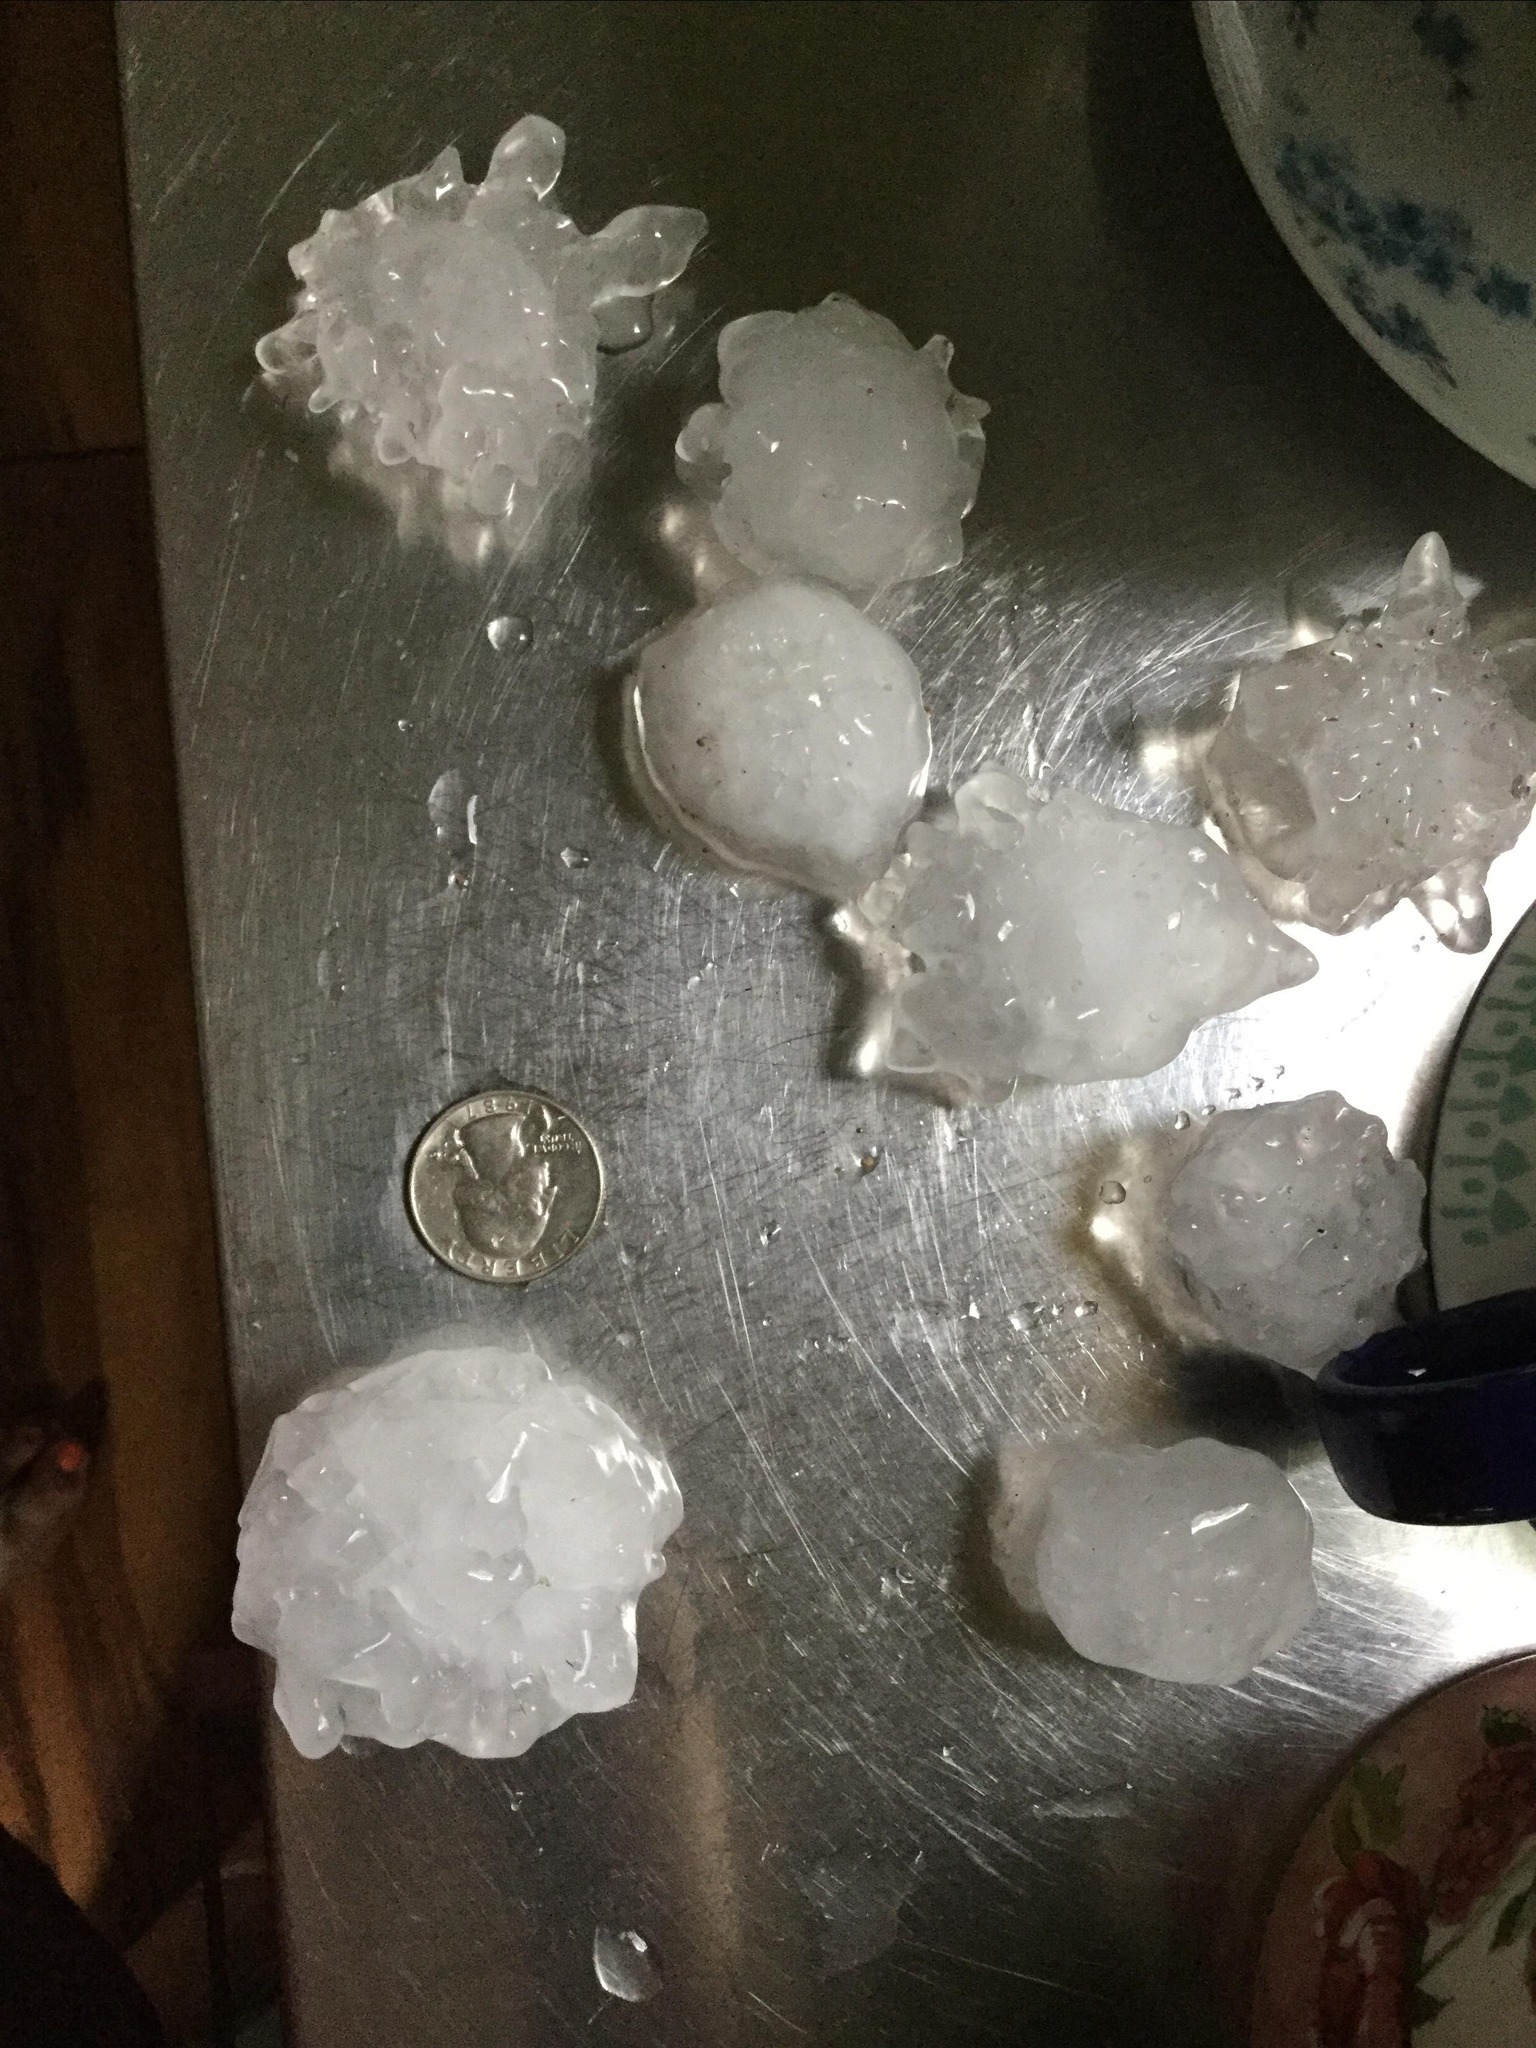 Photo of up to 2 inch hail near the South Dakota and Minnesota border on Highway 34.